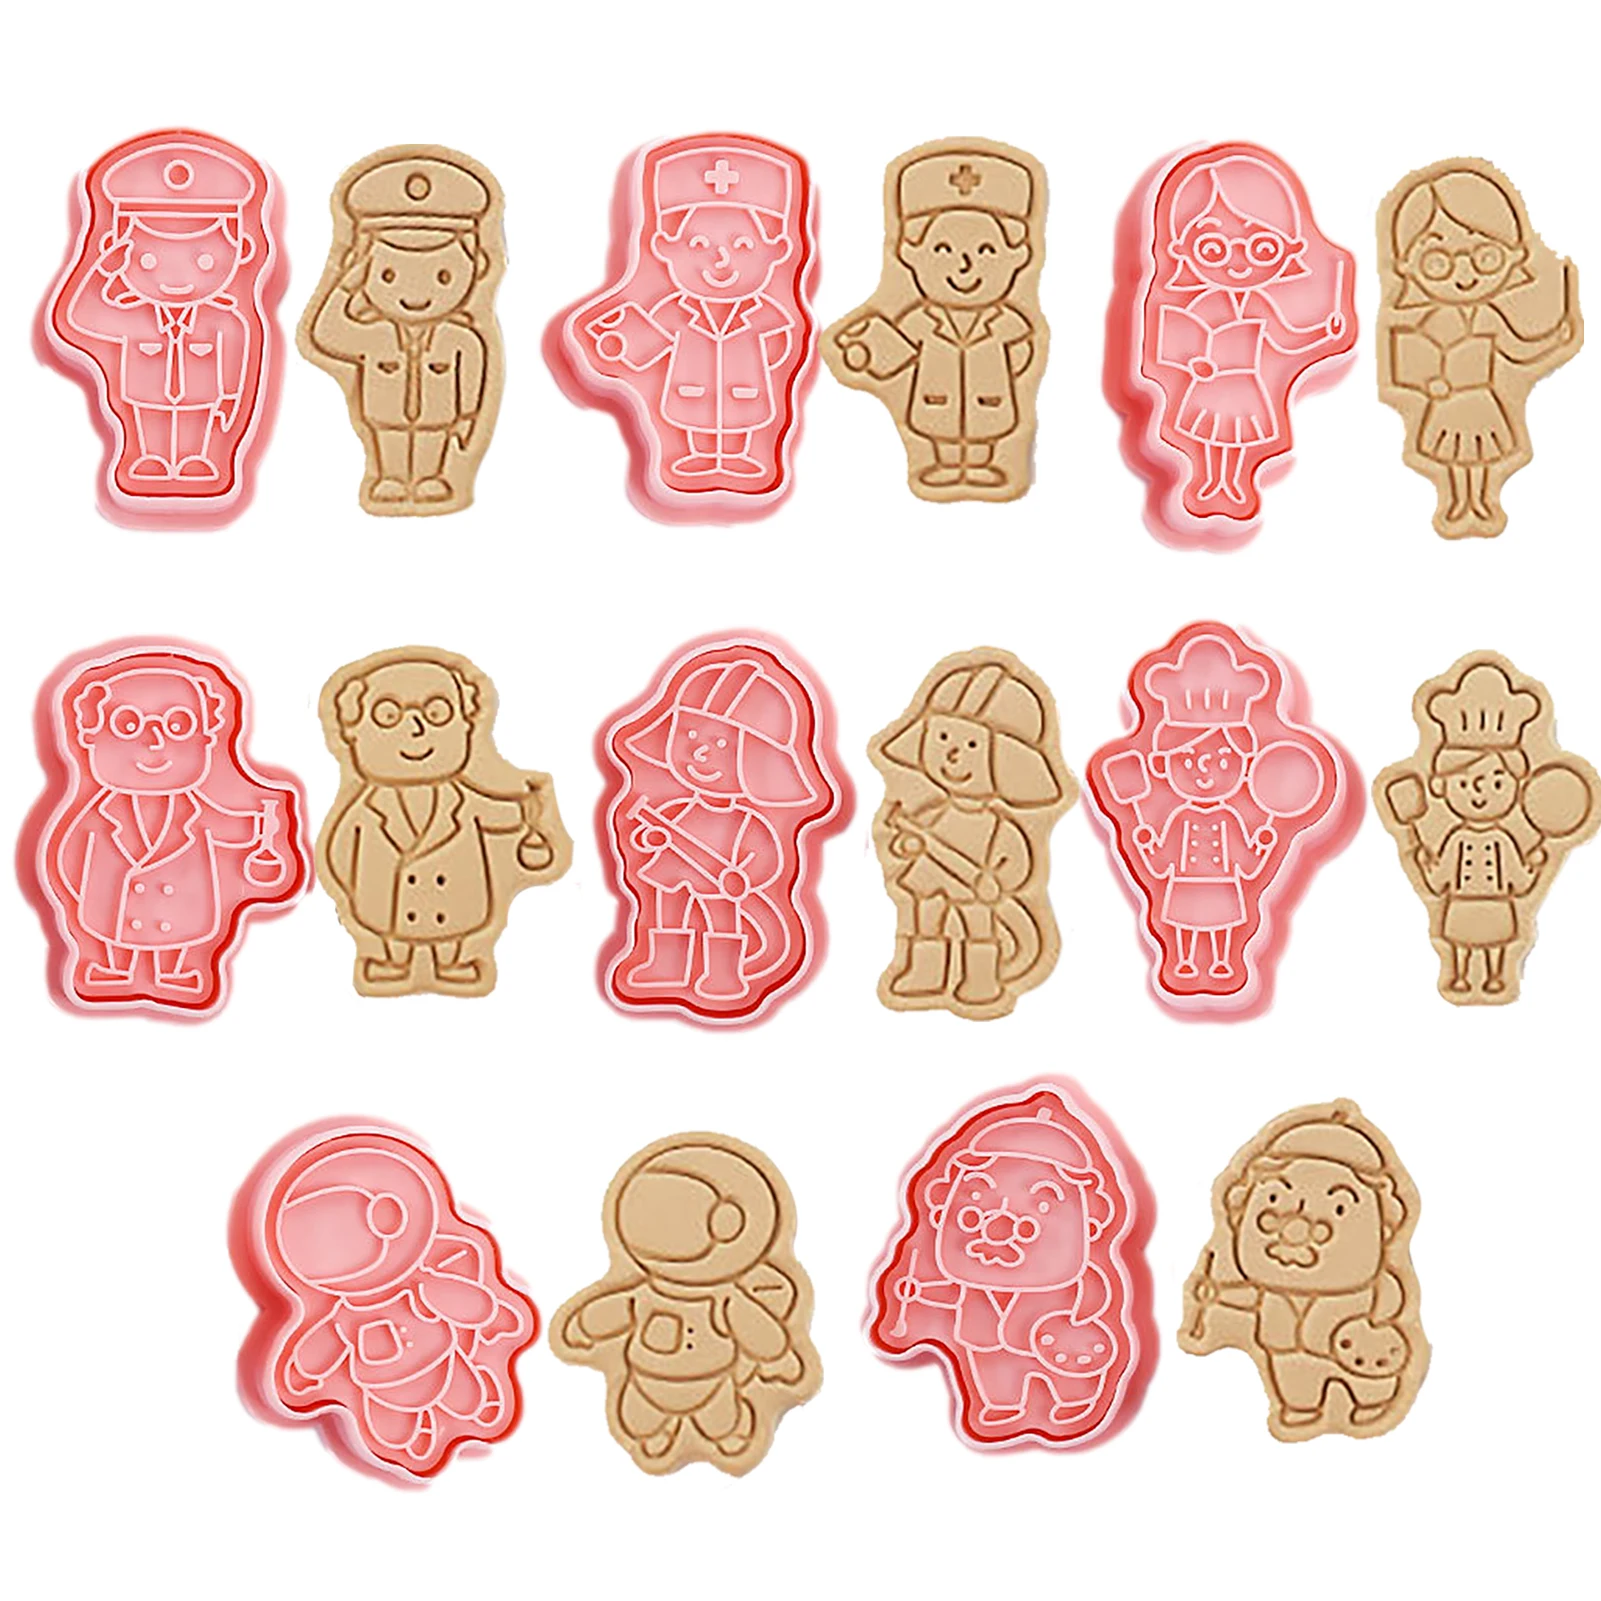 

PP 3D Cookie Stamps Set 8 Styles Cartoon Stamped Embossed Biscuit Mold For Chef Scientist Teacher Shaped Cookie Molds For Baking